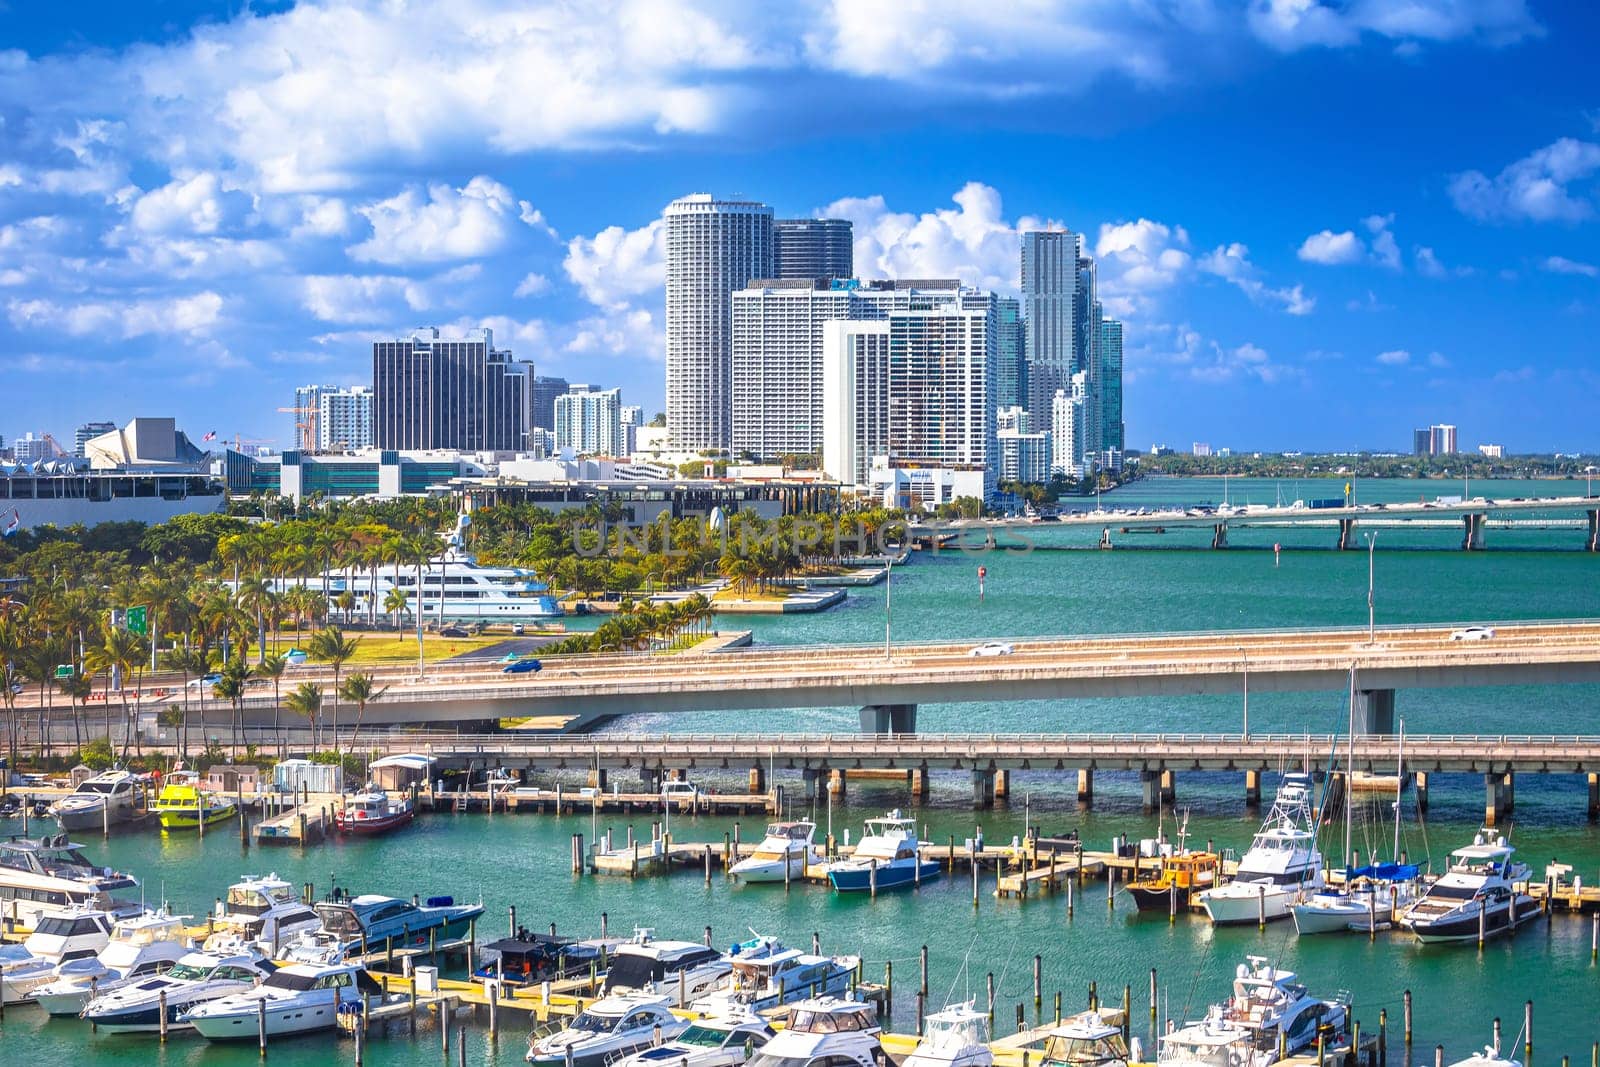 Northern Miami waterfront and skyline panoramic view, Florida  by xbrchx